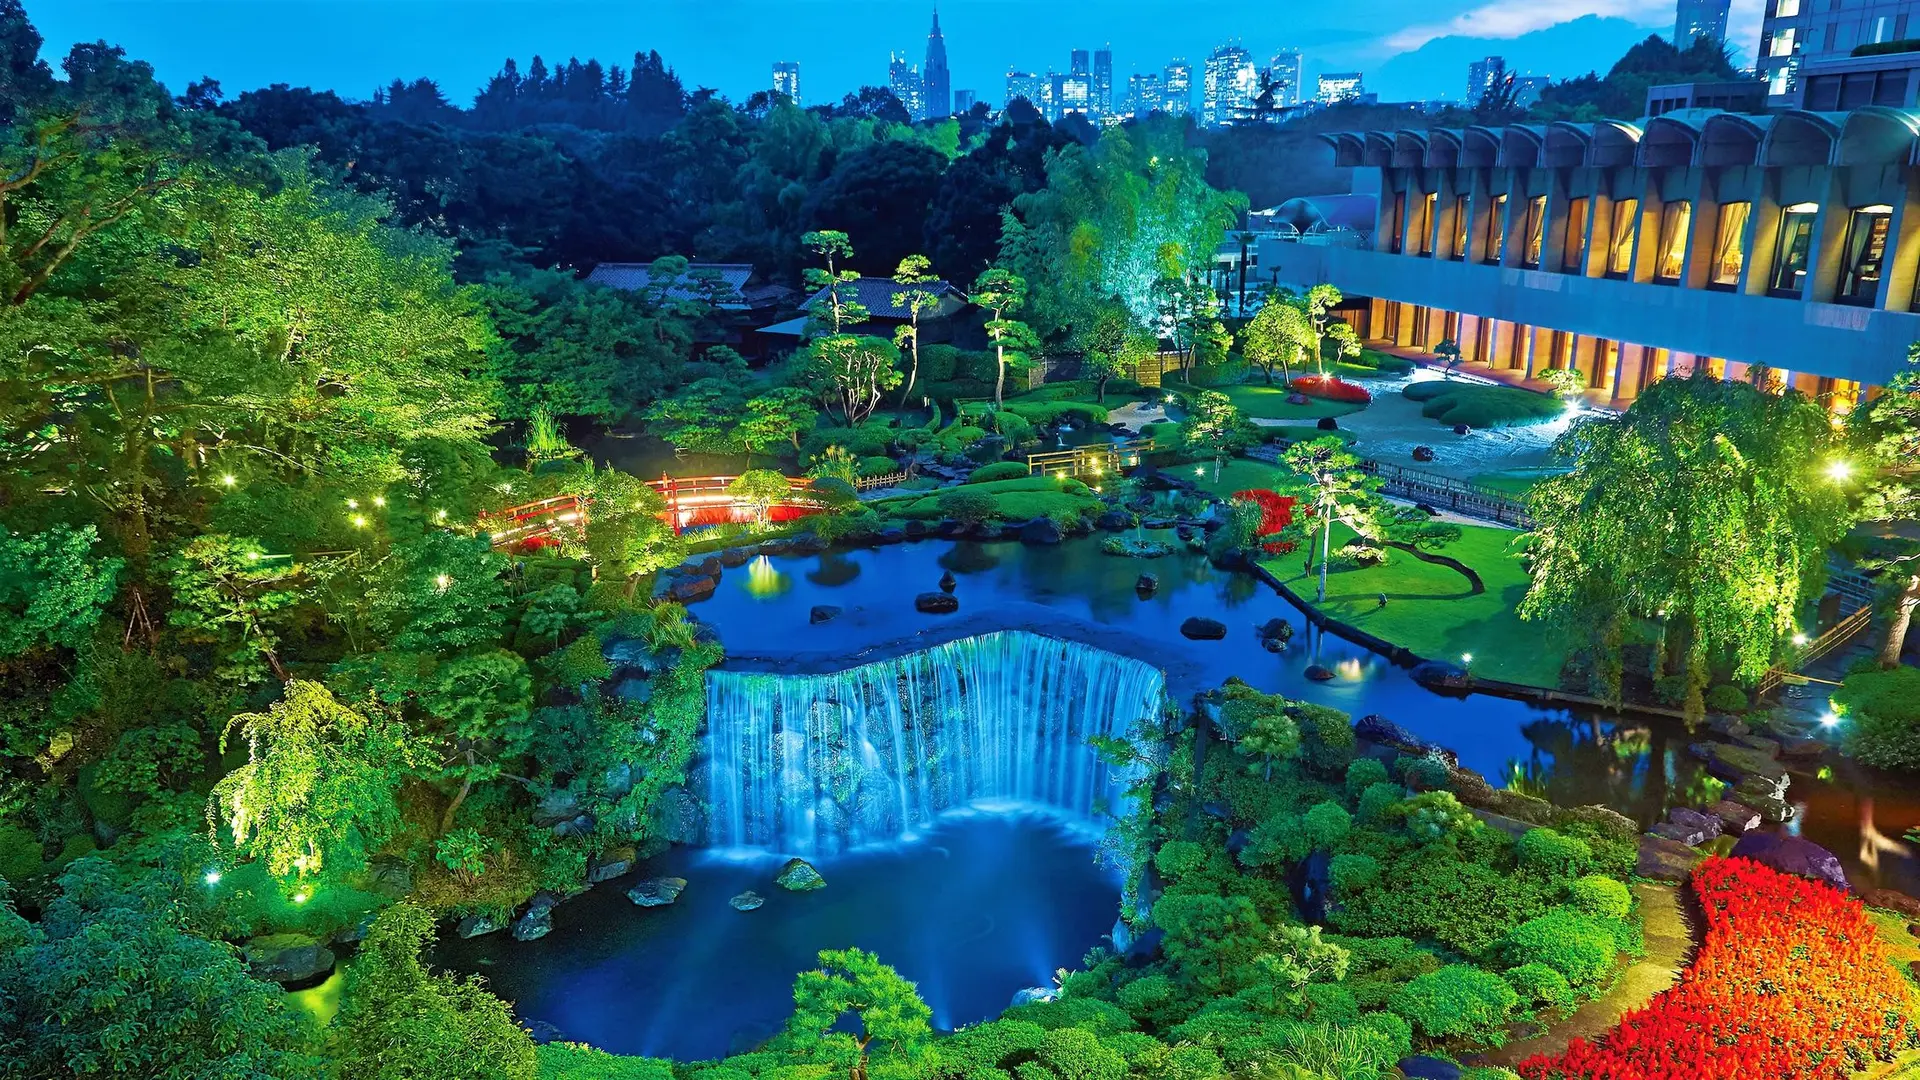 Unbeliveable garden with waterdall, tropical trees, red bridges and large white hotel at New Otani, Tokyo.